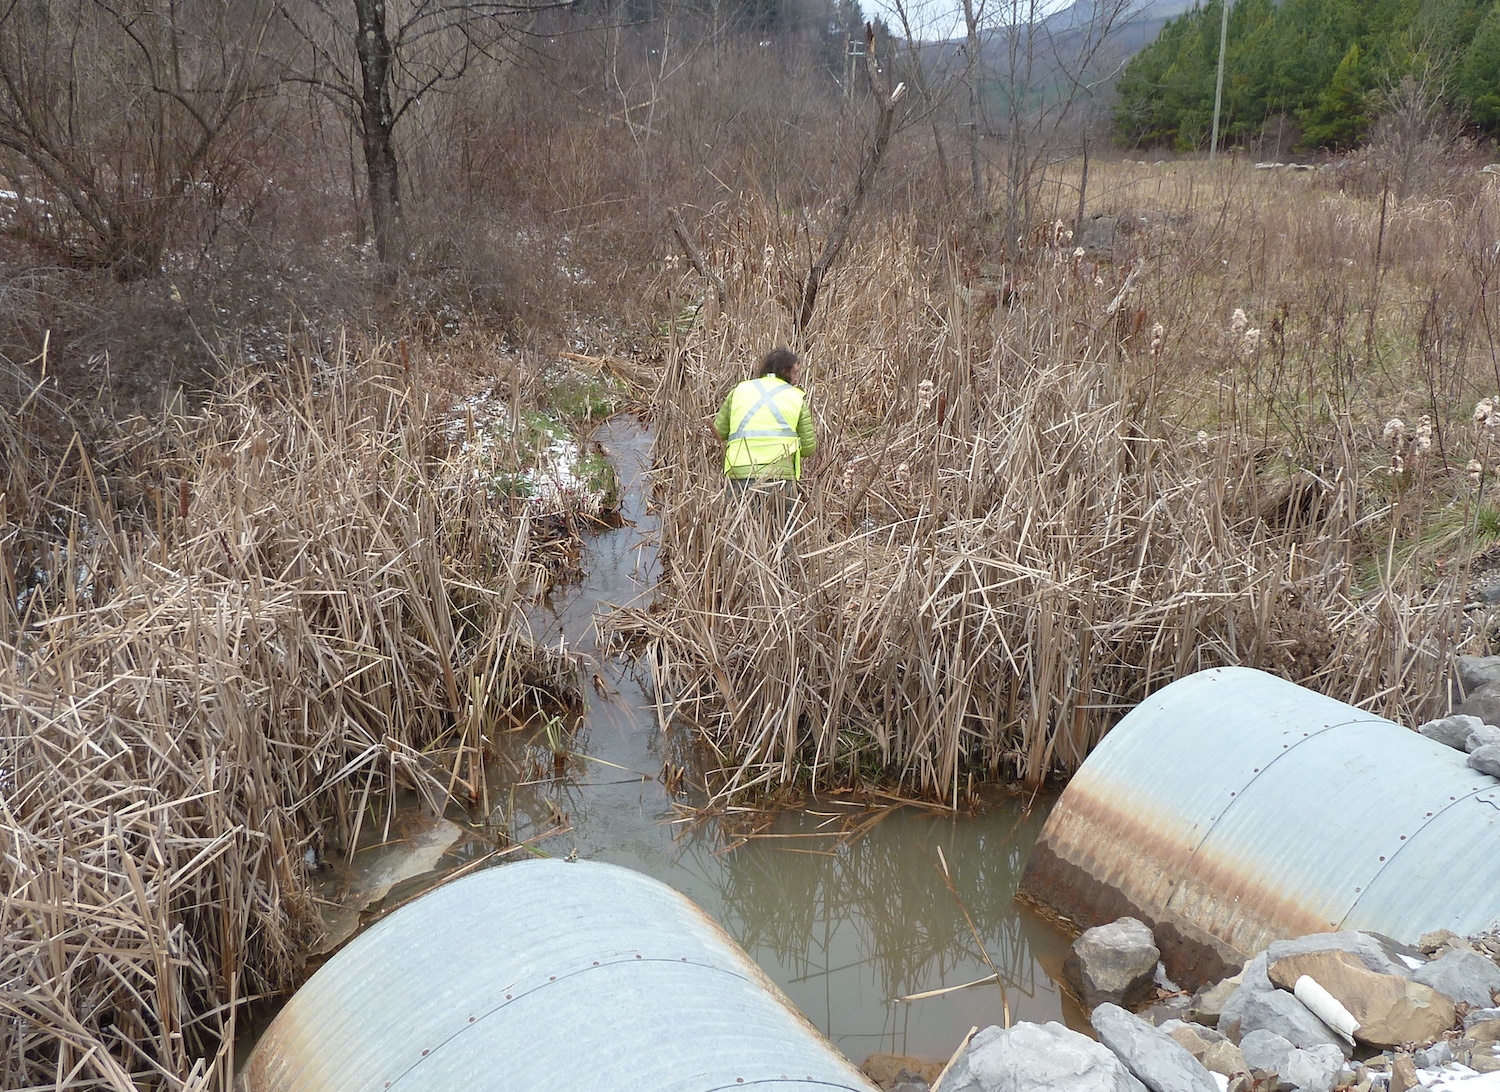 man in green jacket stands in tall grass near small waterway flowing from two large pipes